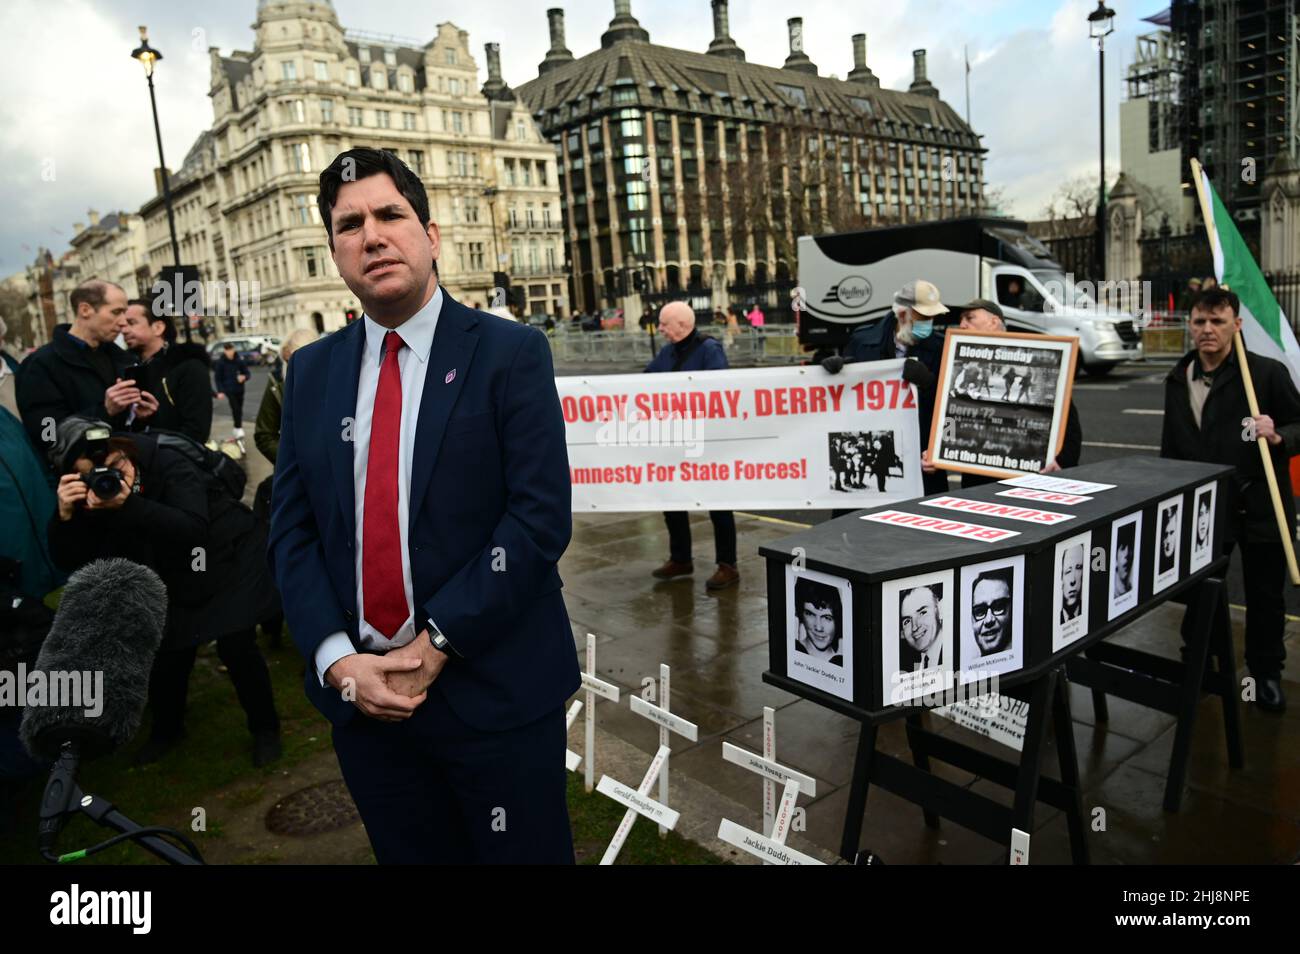 Parliament Square, London, UK. January 27th 2022. Speaker Richard Burgon attends the rally to Remember Bloody Sunday, Derry 1972. The Irish people want justice of the Bloody Sunday, Derry 1972 and Irish people should have the courage United Ireland. Credit: Picture Capital/Alamy Live News Stock Photo